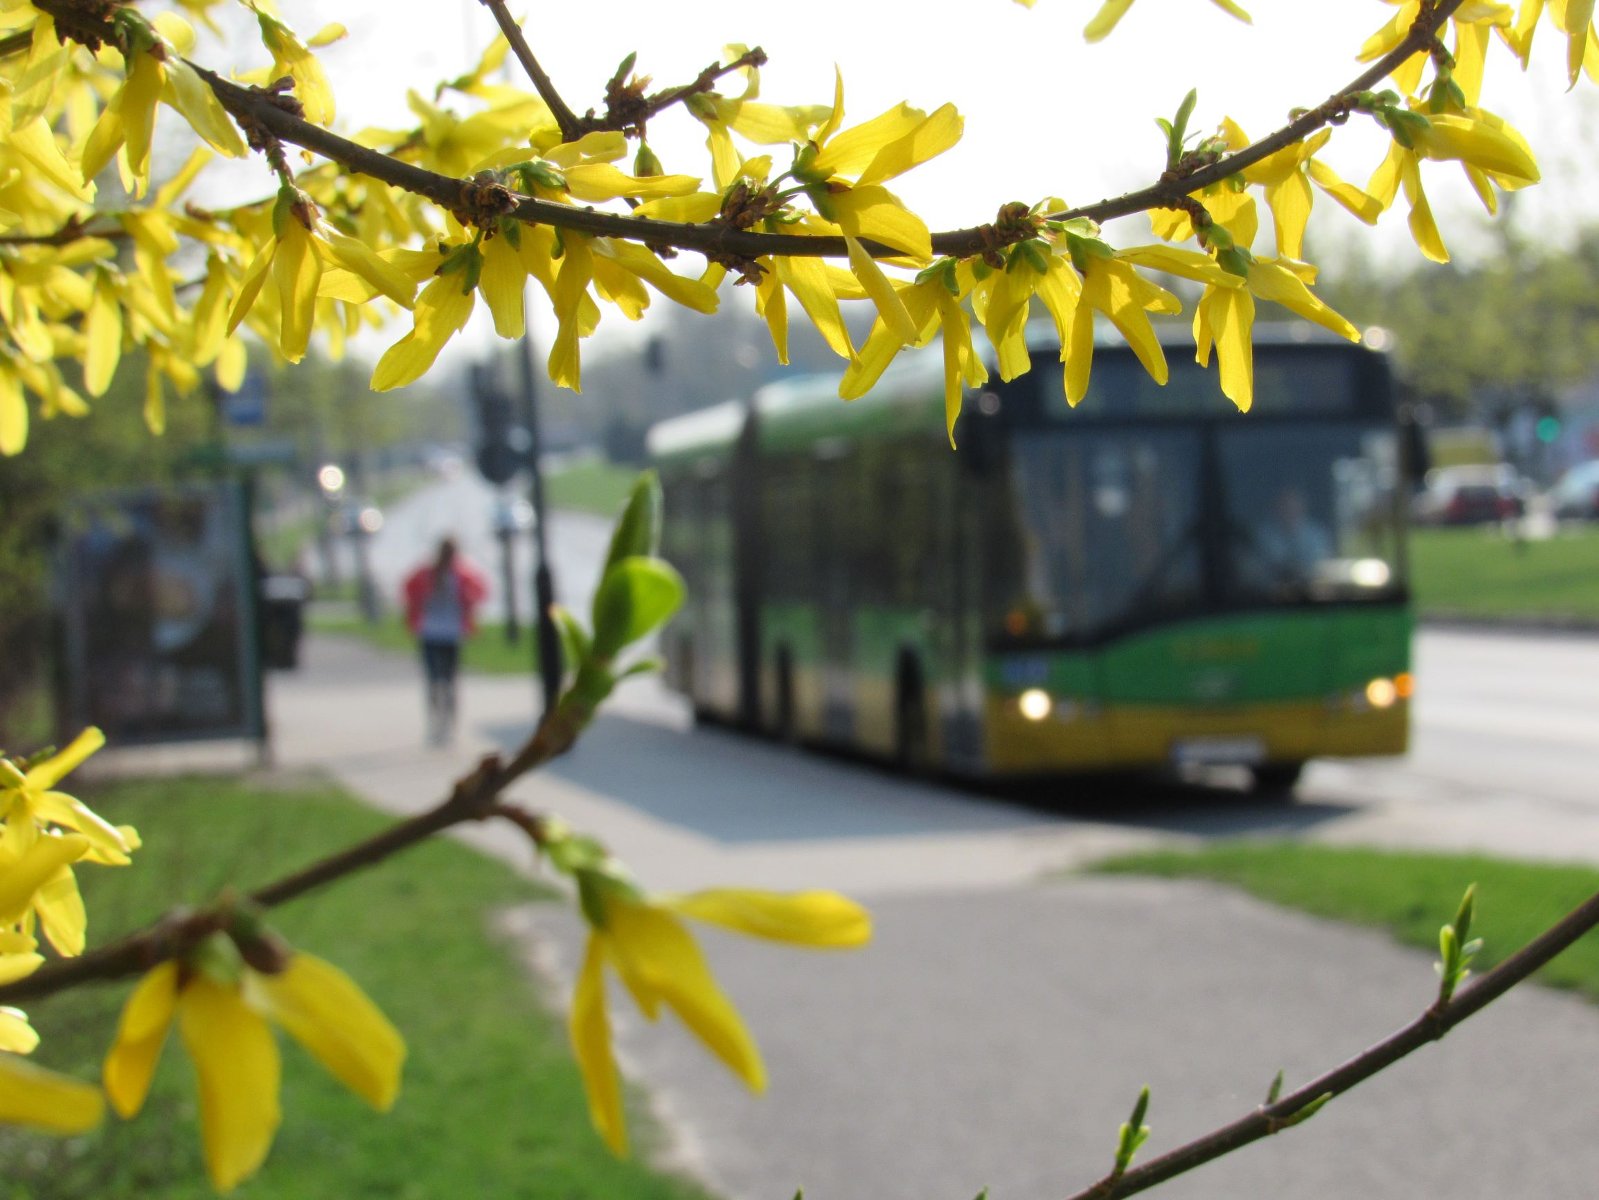 In the frame twigs with yellow flowers, green bus in the background.